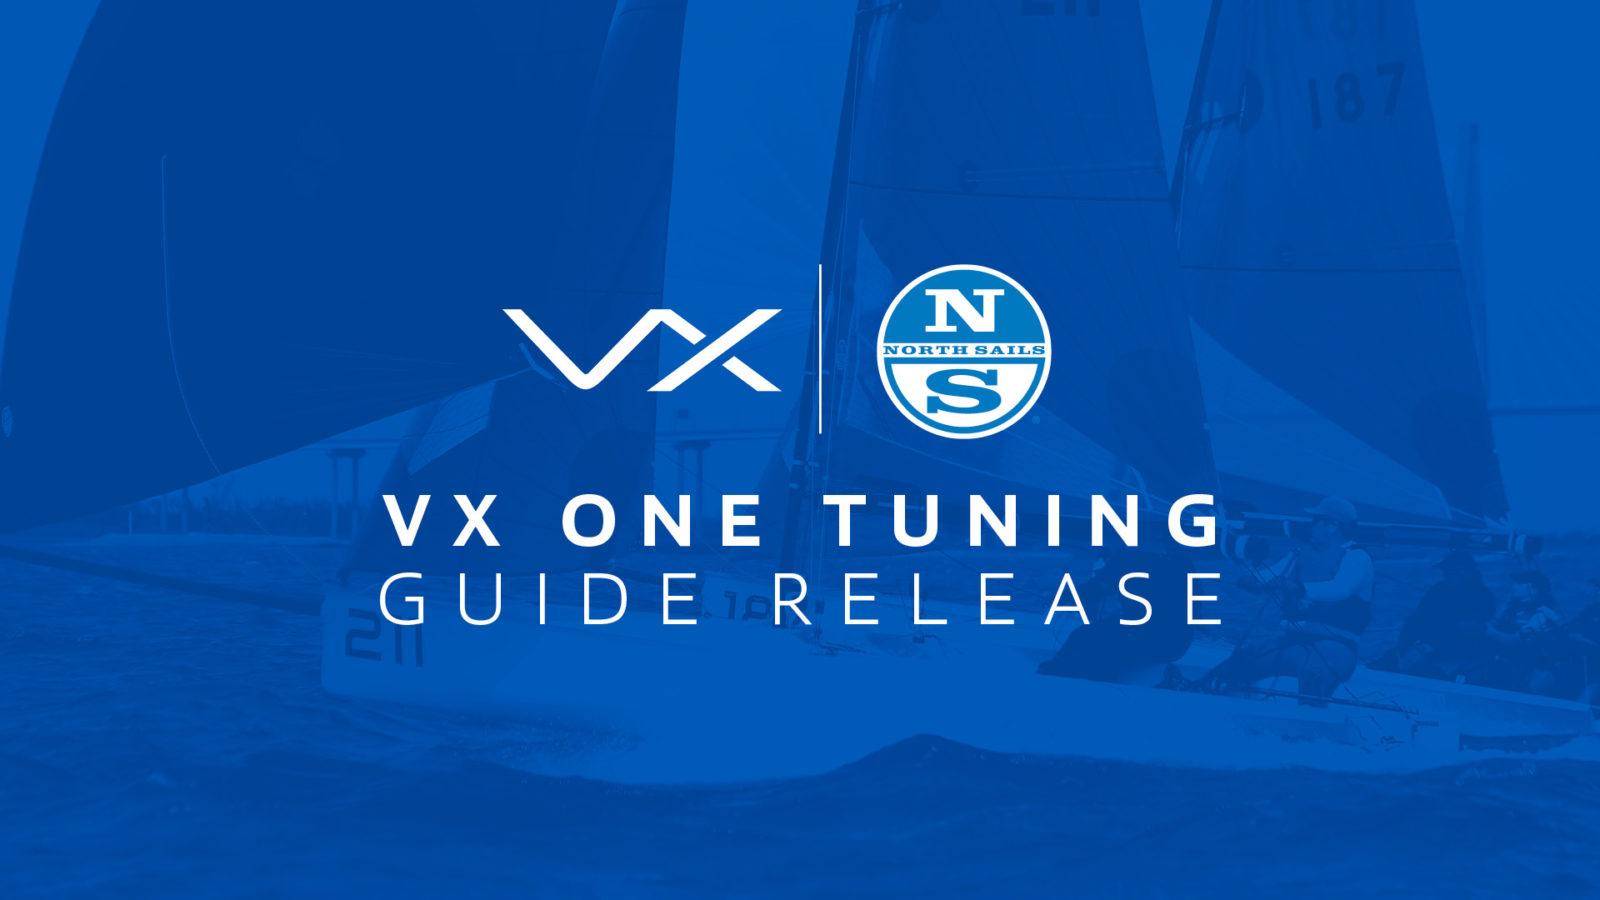 VX ONE TUNING GUIDE 2021-22 UPDATE